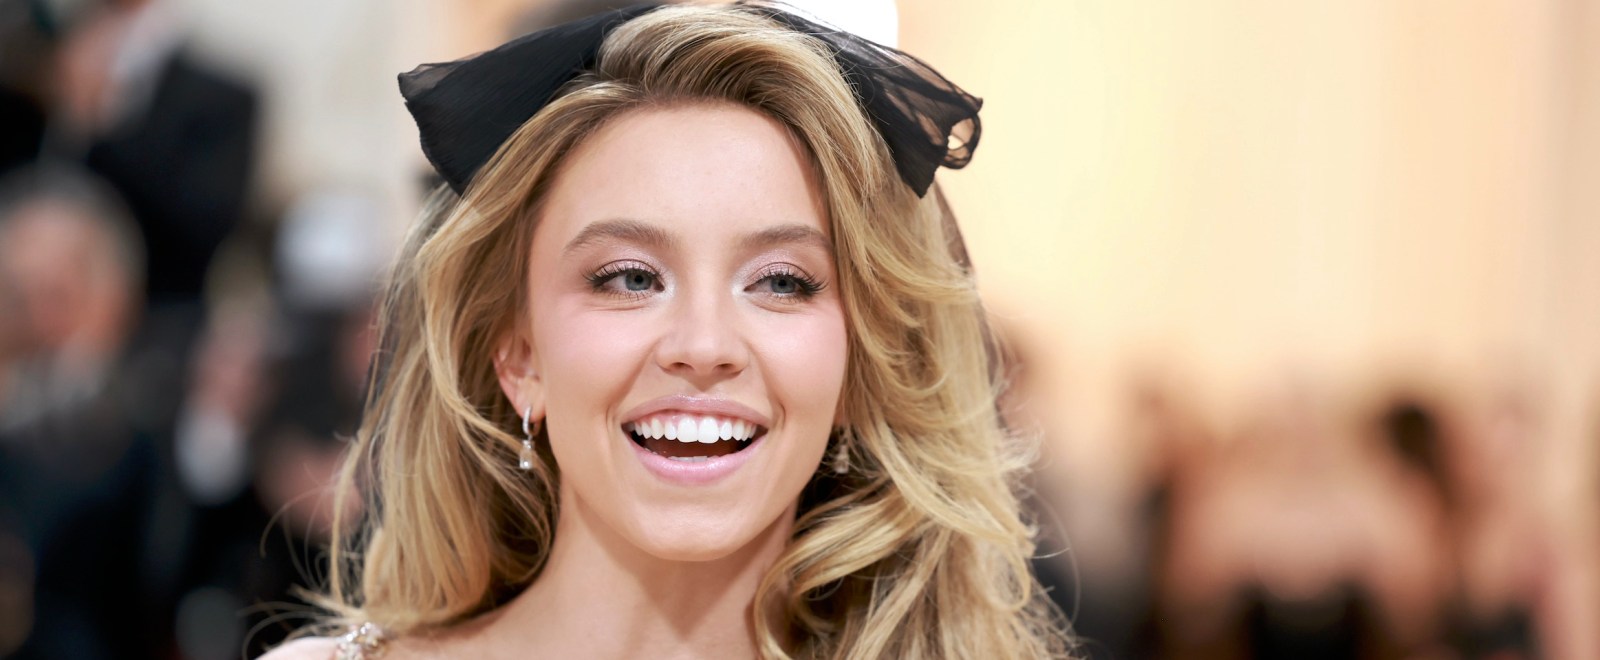 Is Sydney Sweeney Really Starring In A Movie With Johnny Depp?